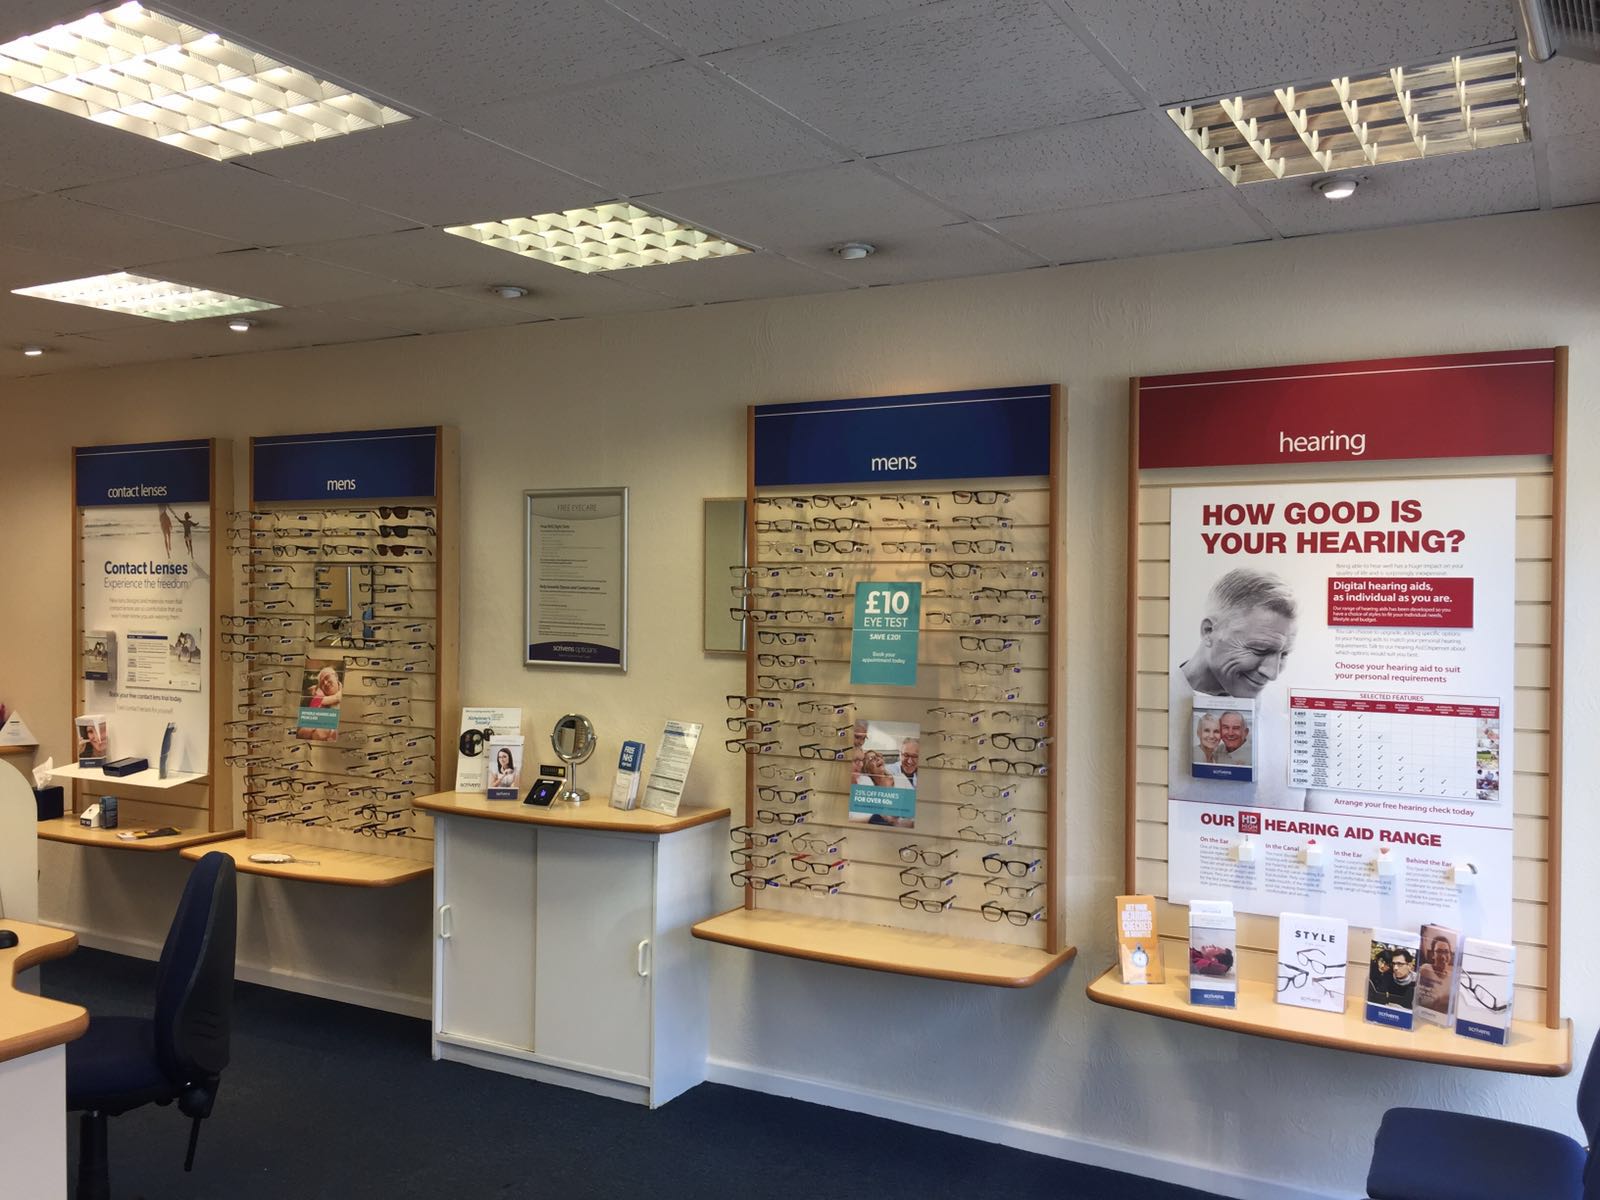 Scrivens Opticians & Hearing Care